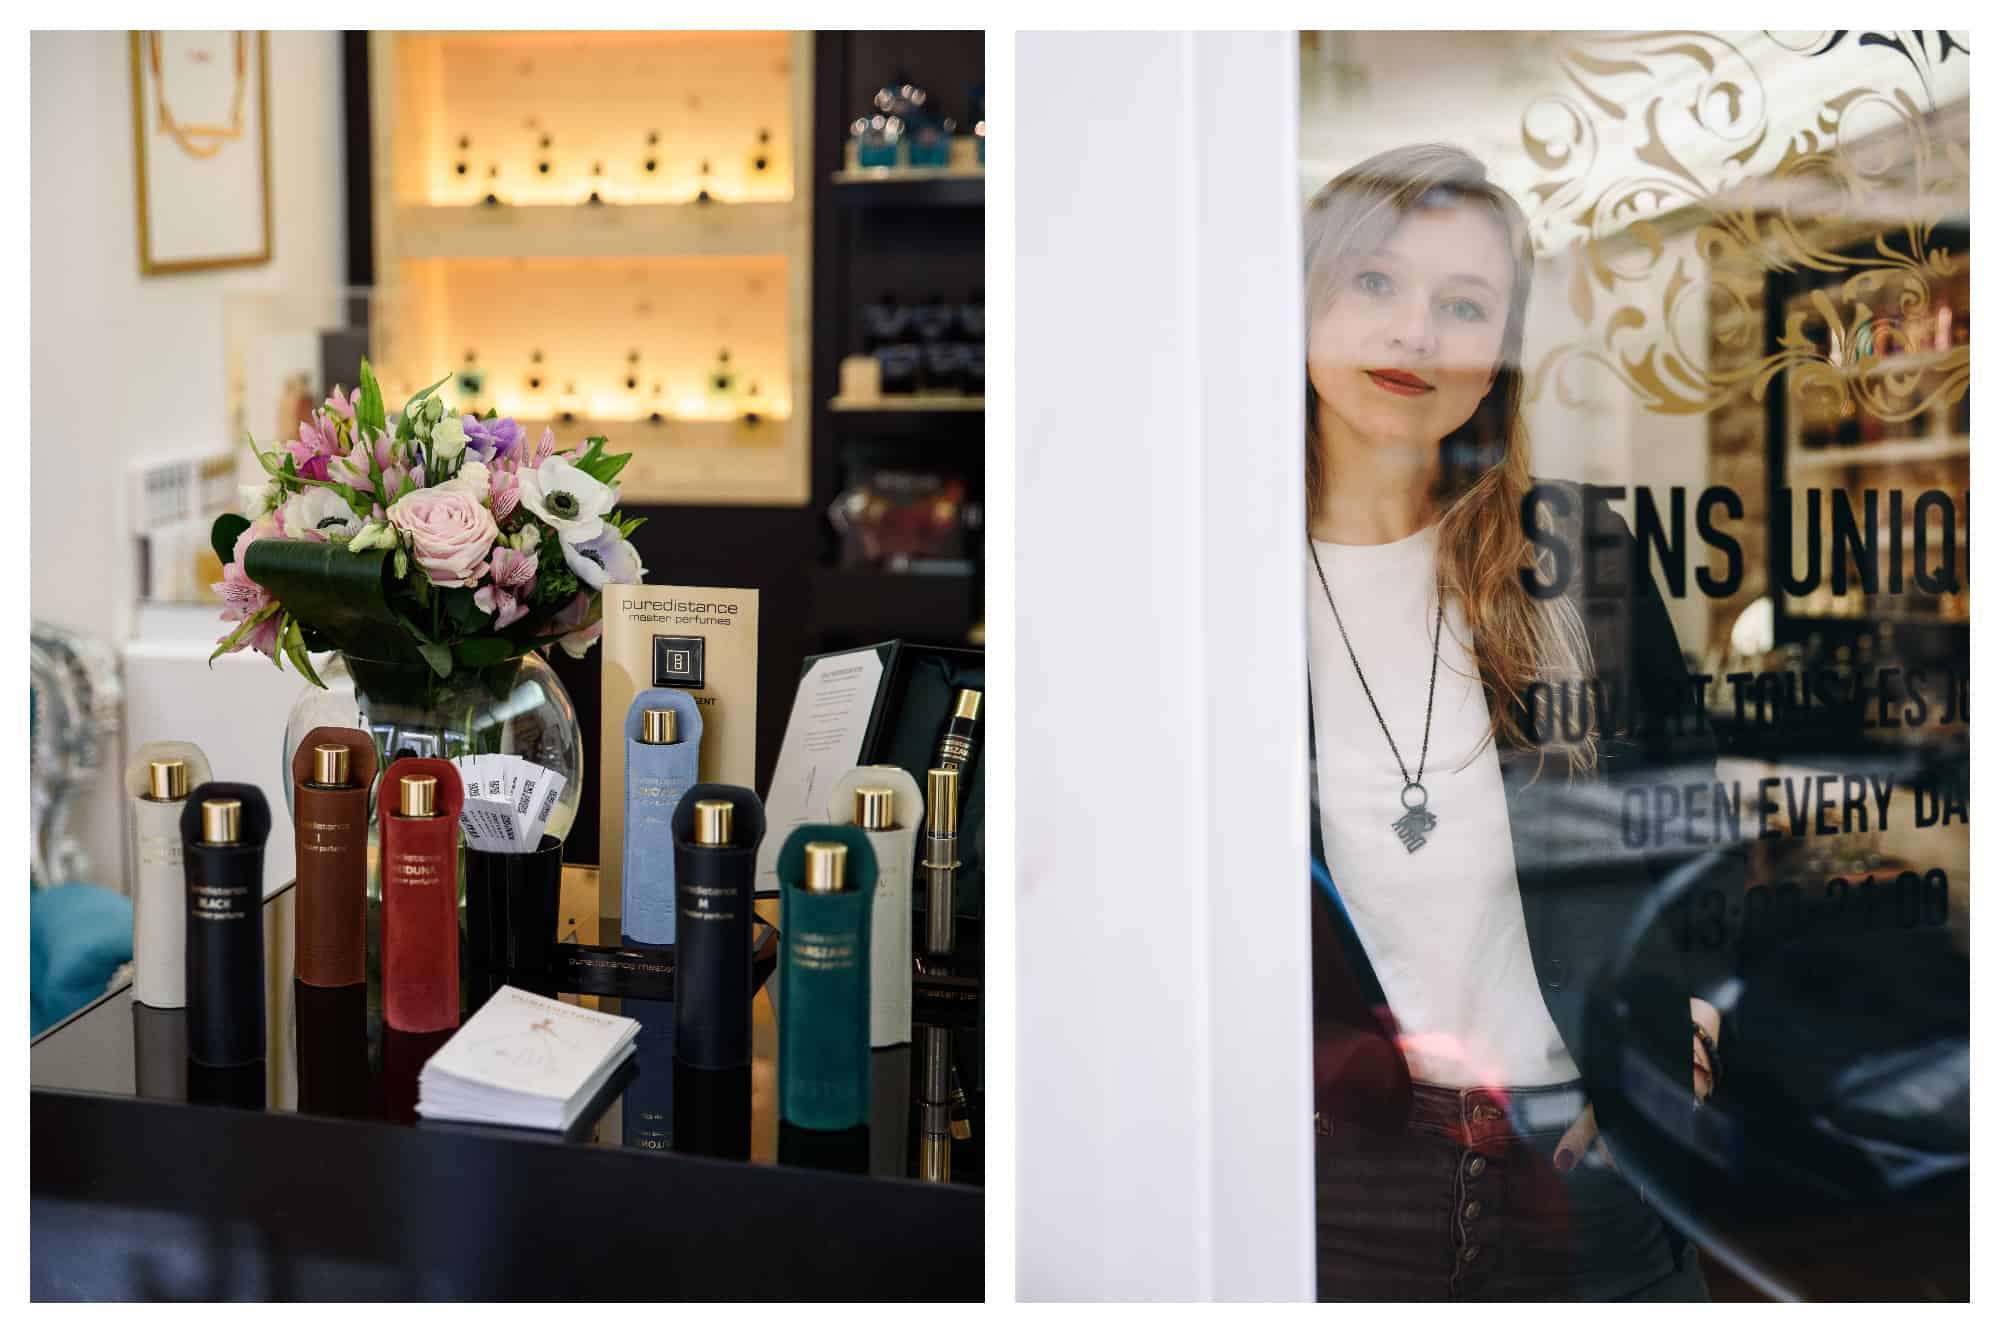 On left: Golden-capped bottles of perfume sit snuggly in leather pouches of different colors, next to an overflowing bouquet of roses and anemones at a Sens Unique boutique, which stocks only bottles from niche perfumeries. On right: A shopgirl gives a shy smile from the window of the Sens Unique shop, an intimate, chic destination for exclusive perfumes. 